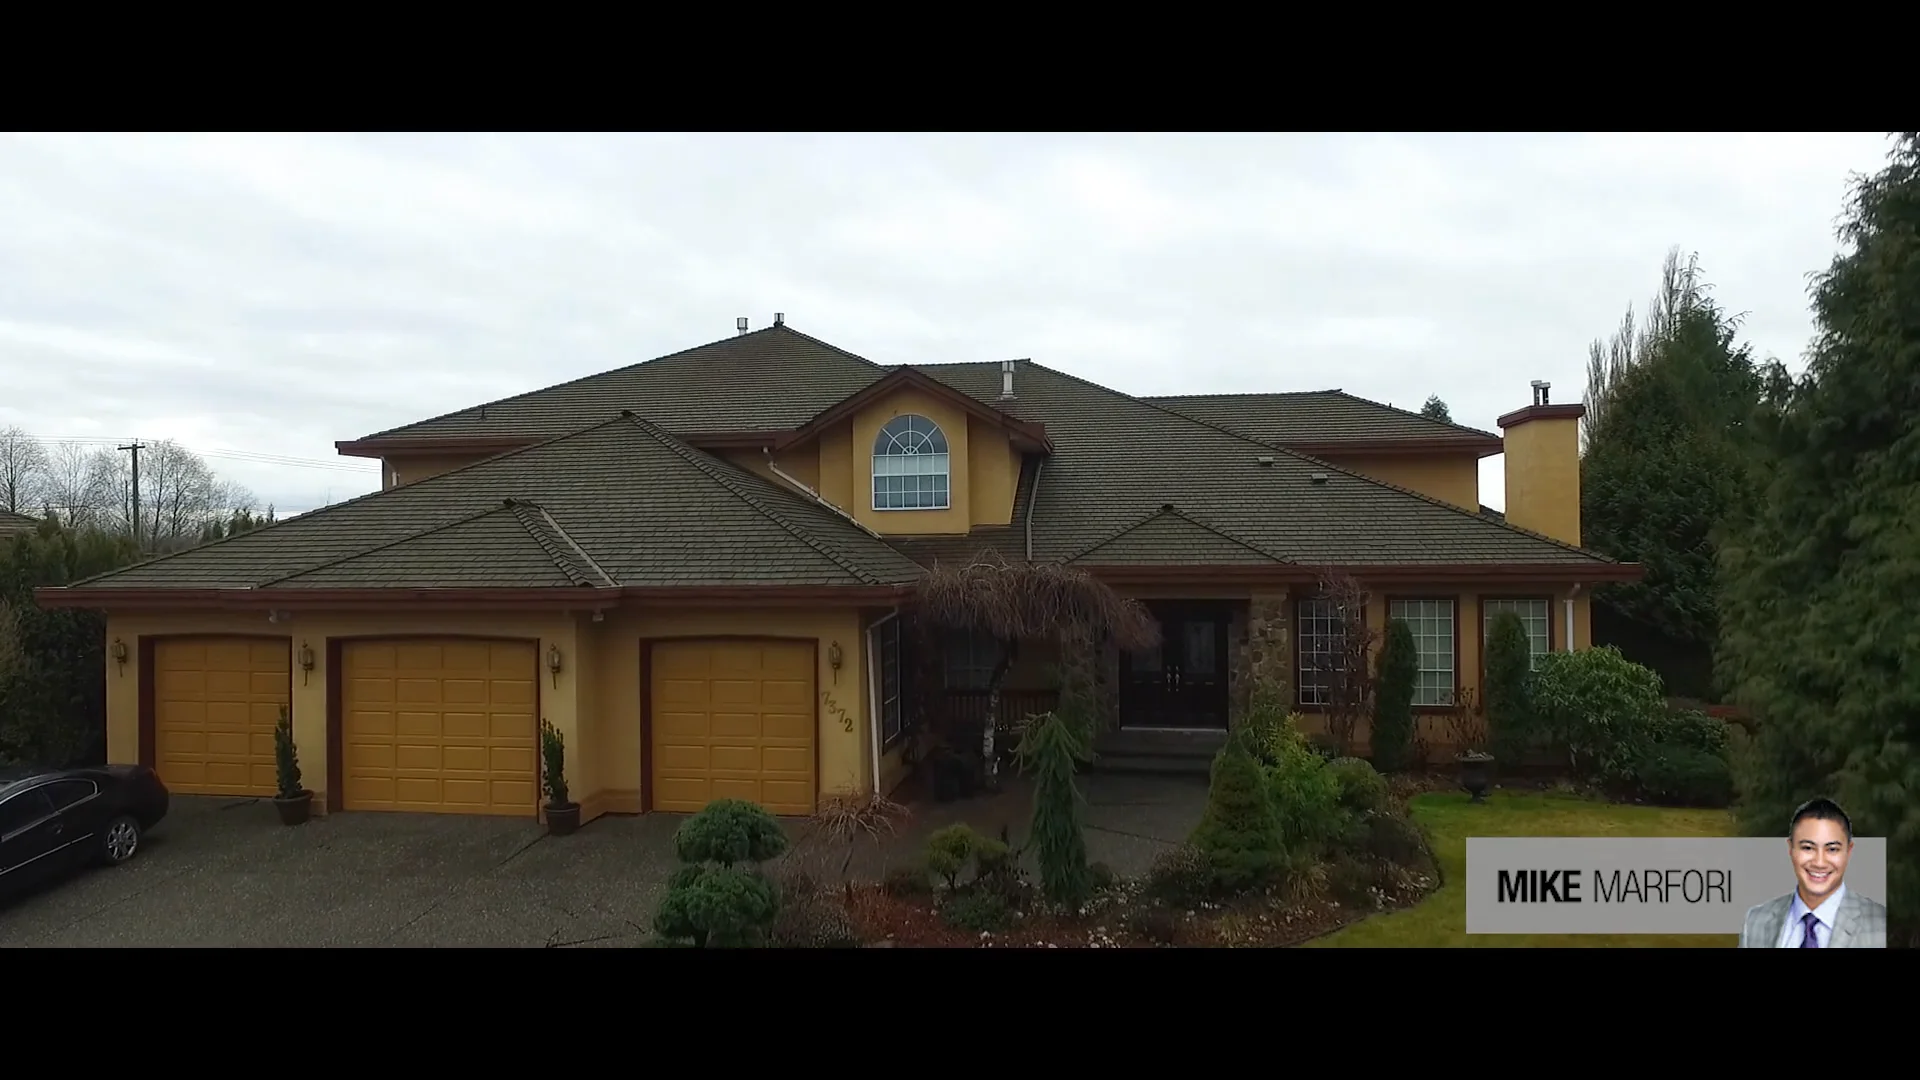 7372 151a st, Surrey for Mike Marfori on Vimeo